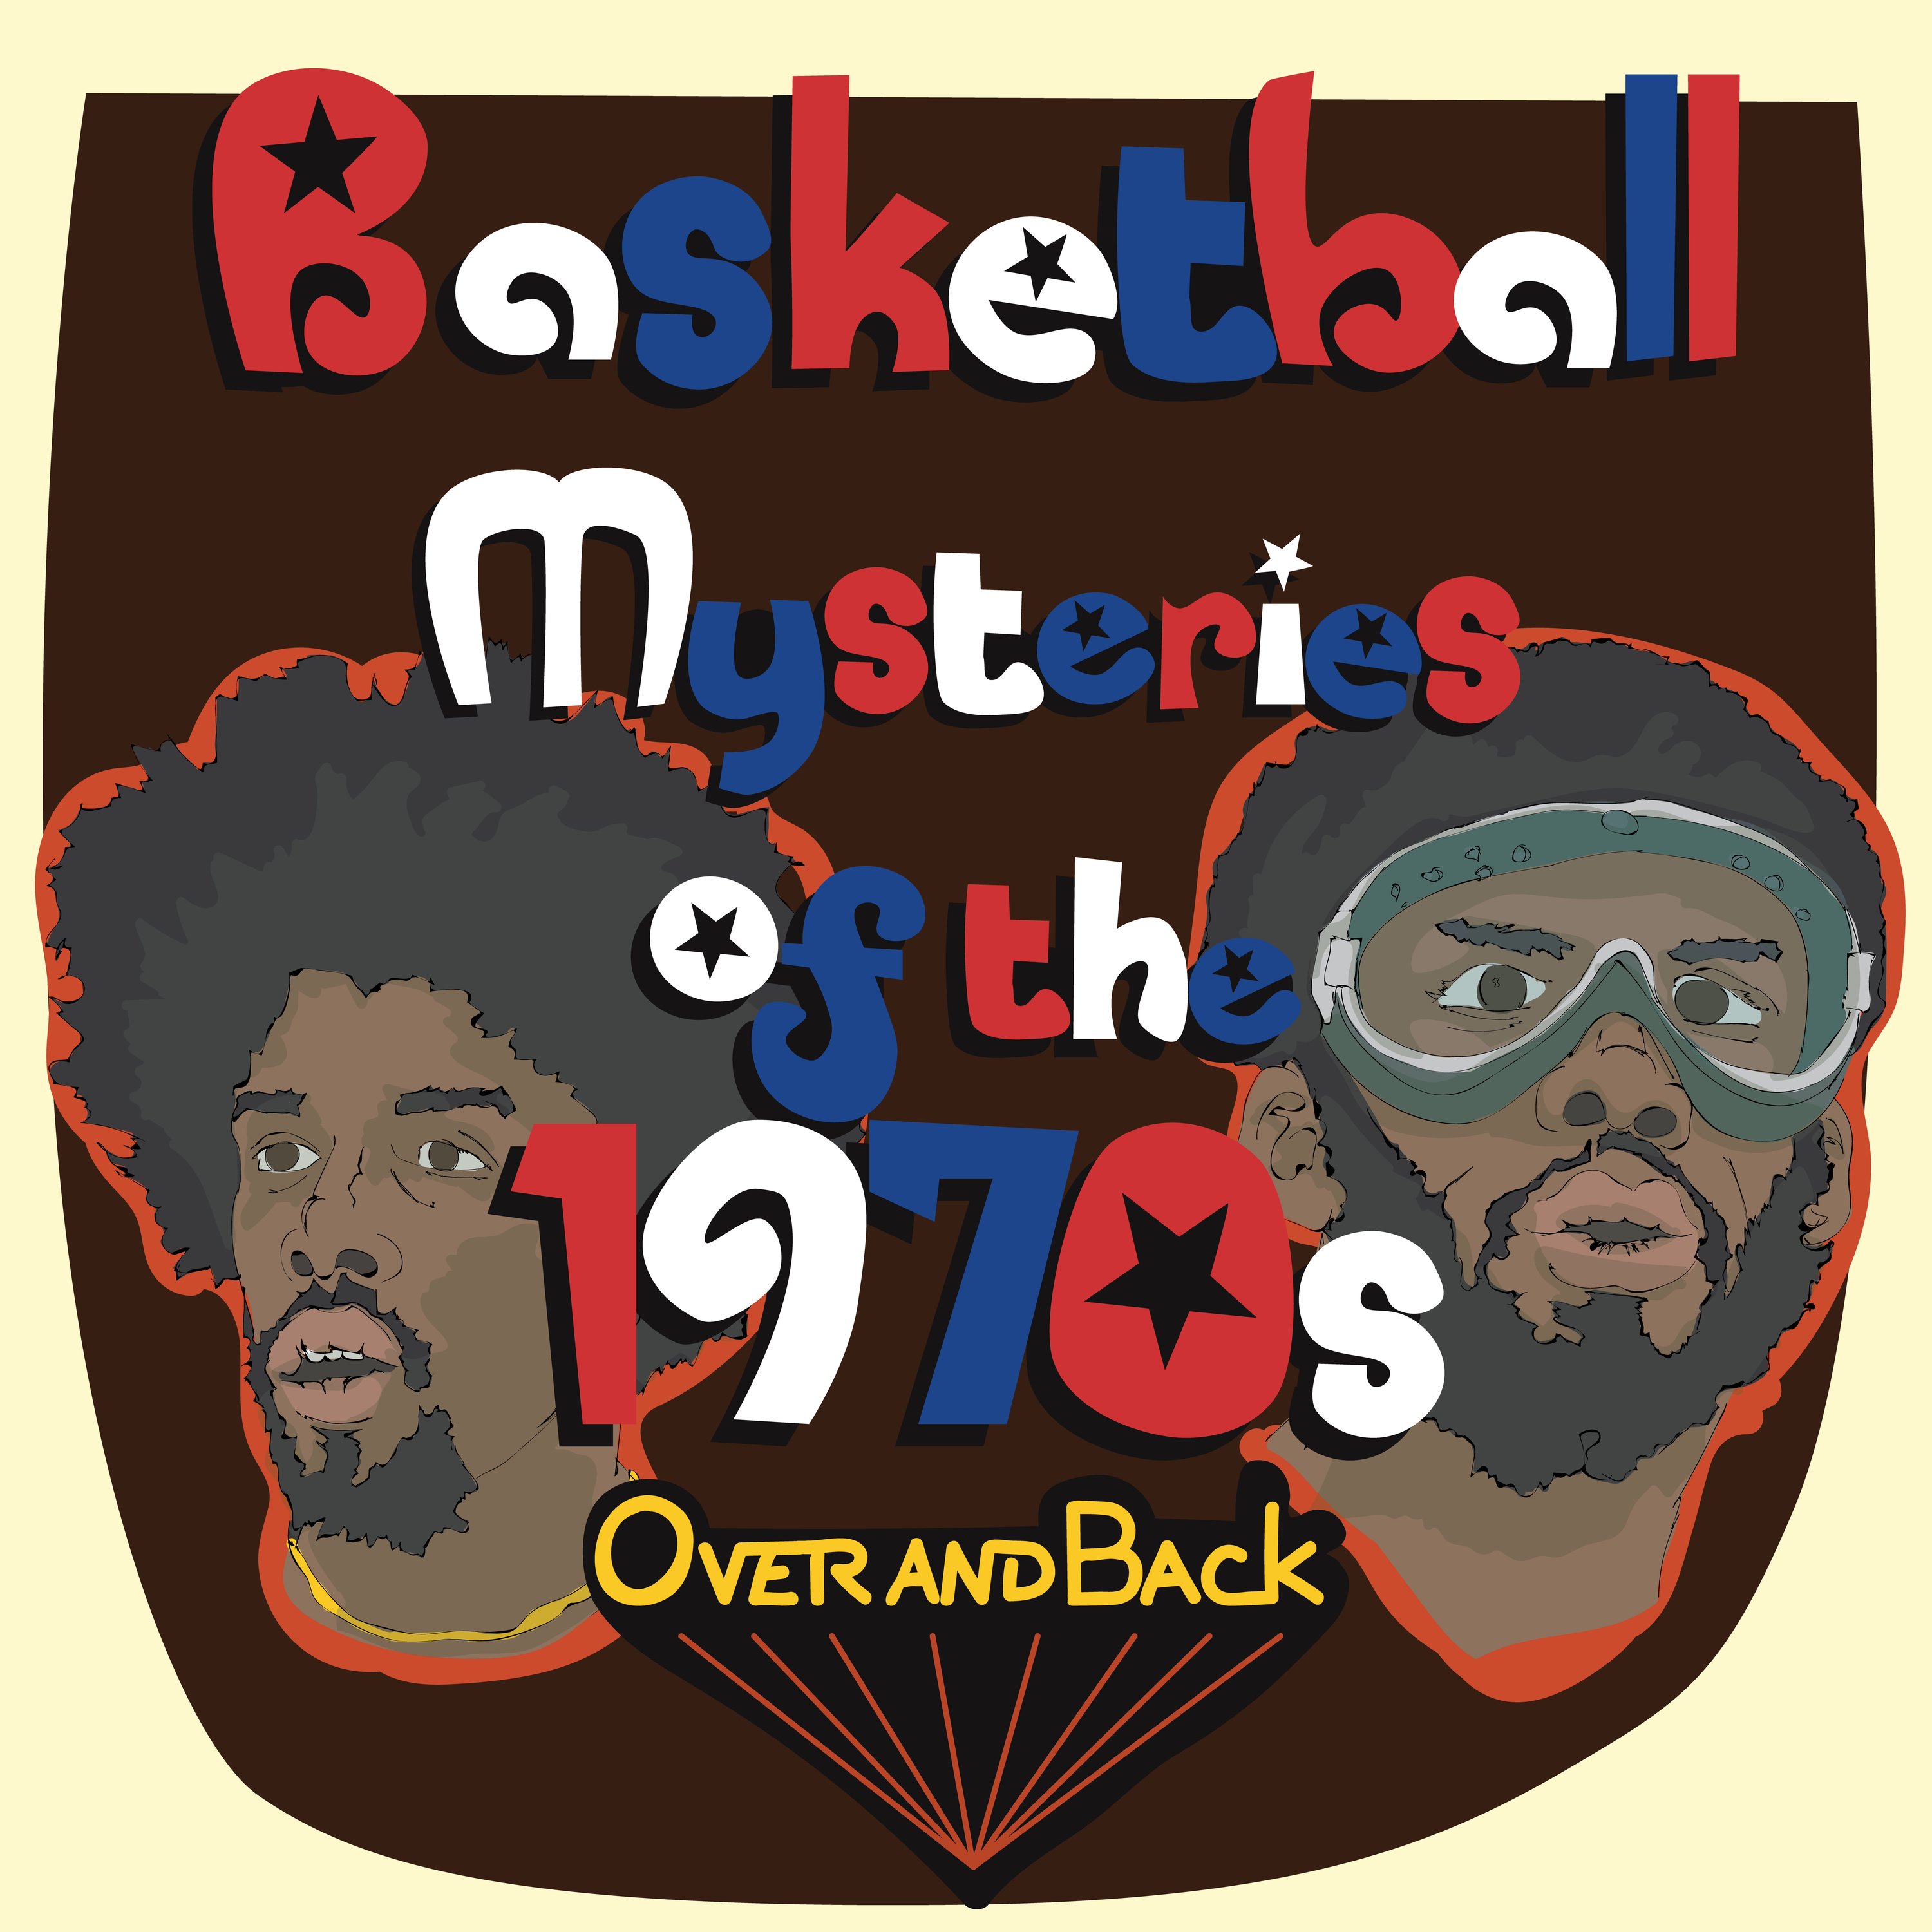 What finally brought the ABA and NBA together? (Basketball Mysteries of the 1970s #36)